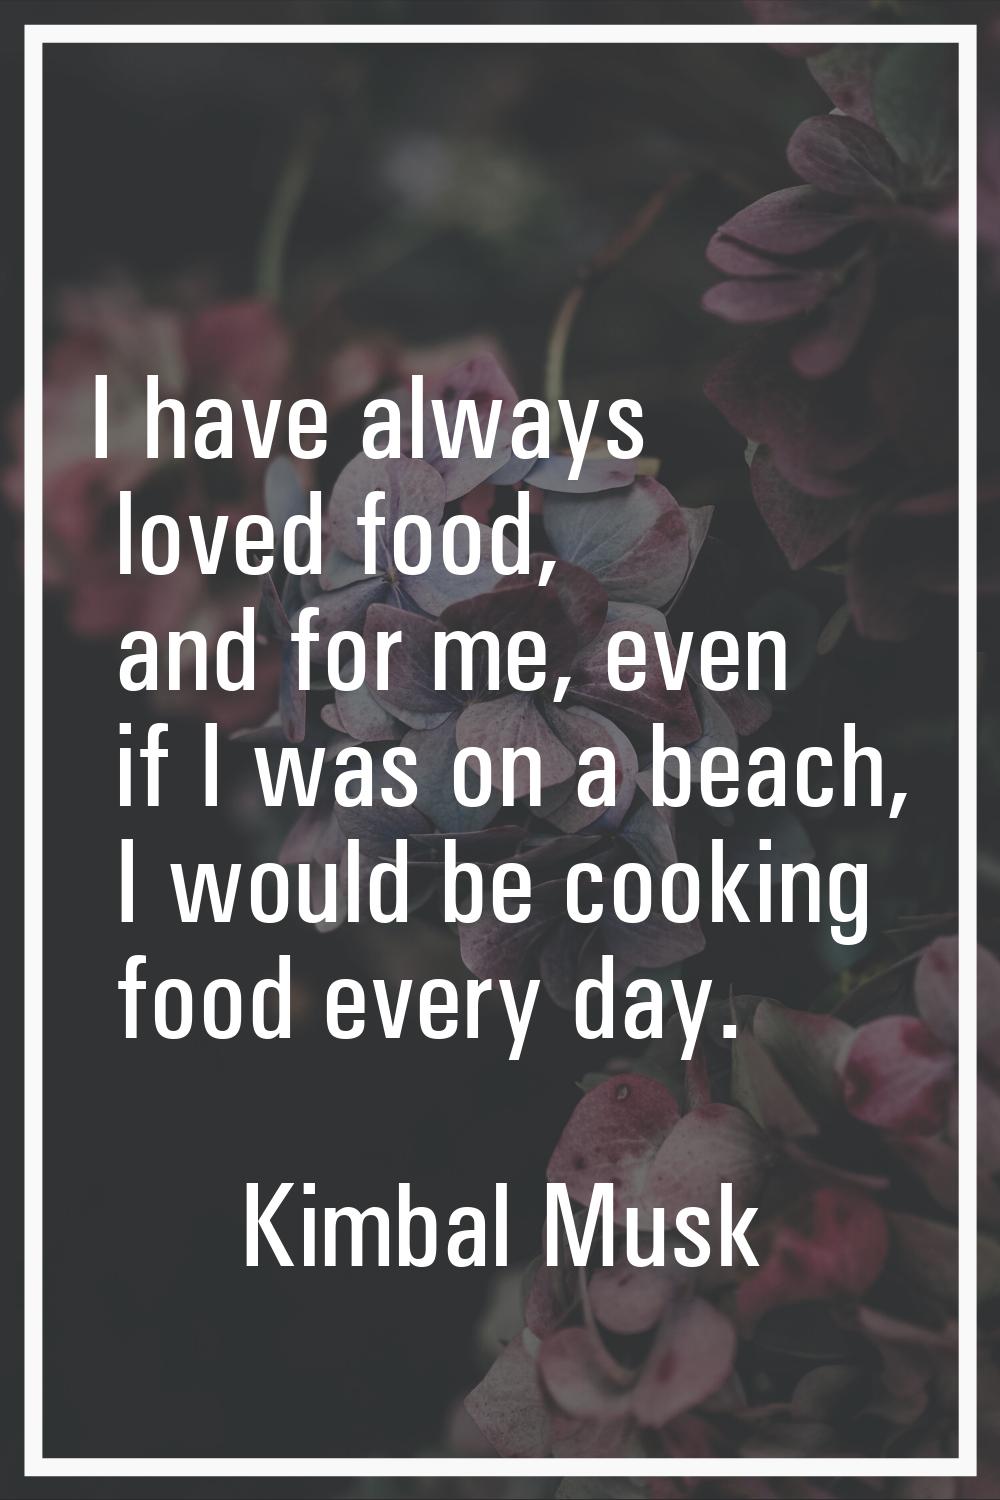 I have always loved food, and for me, even if I was on a beach, I would be cooking food every day.